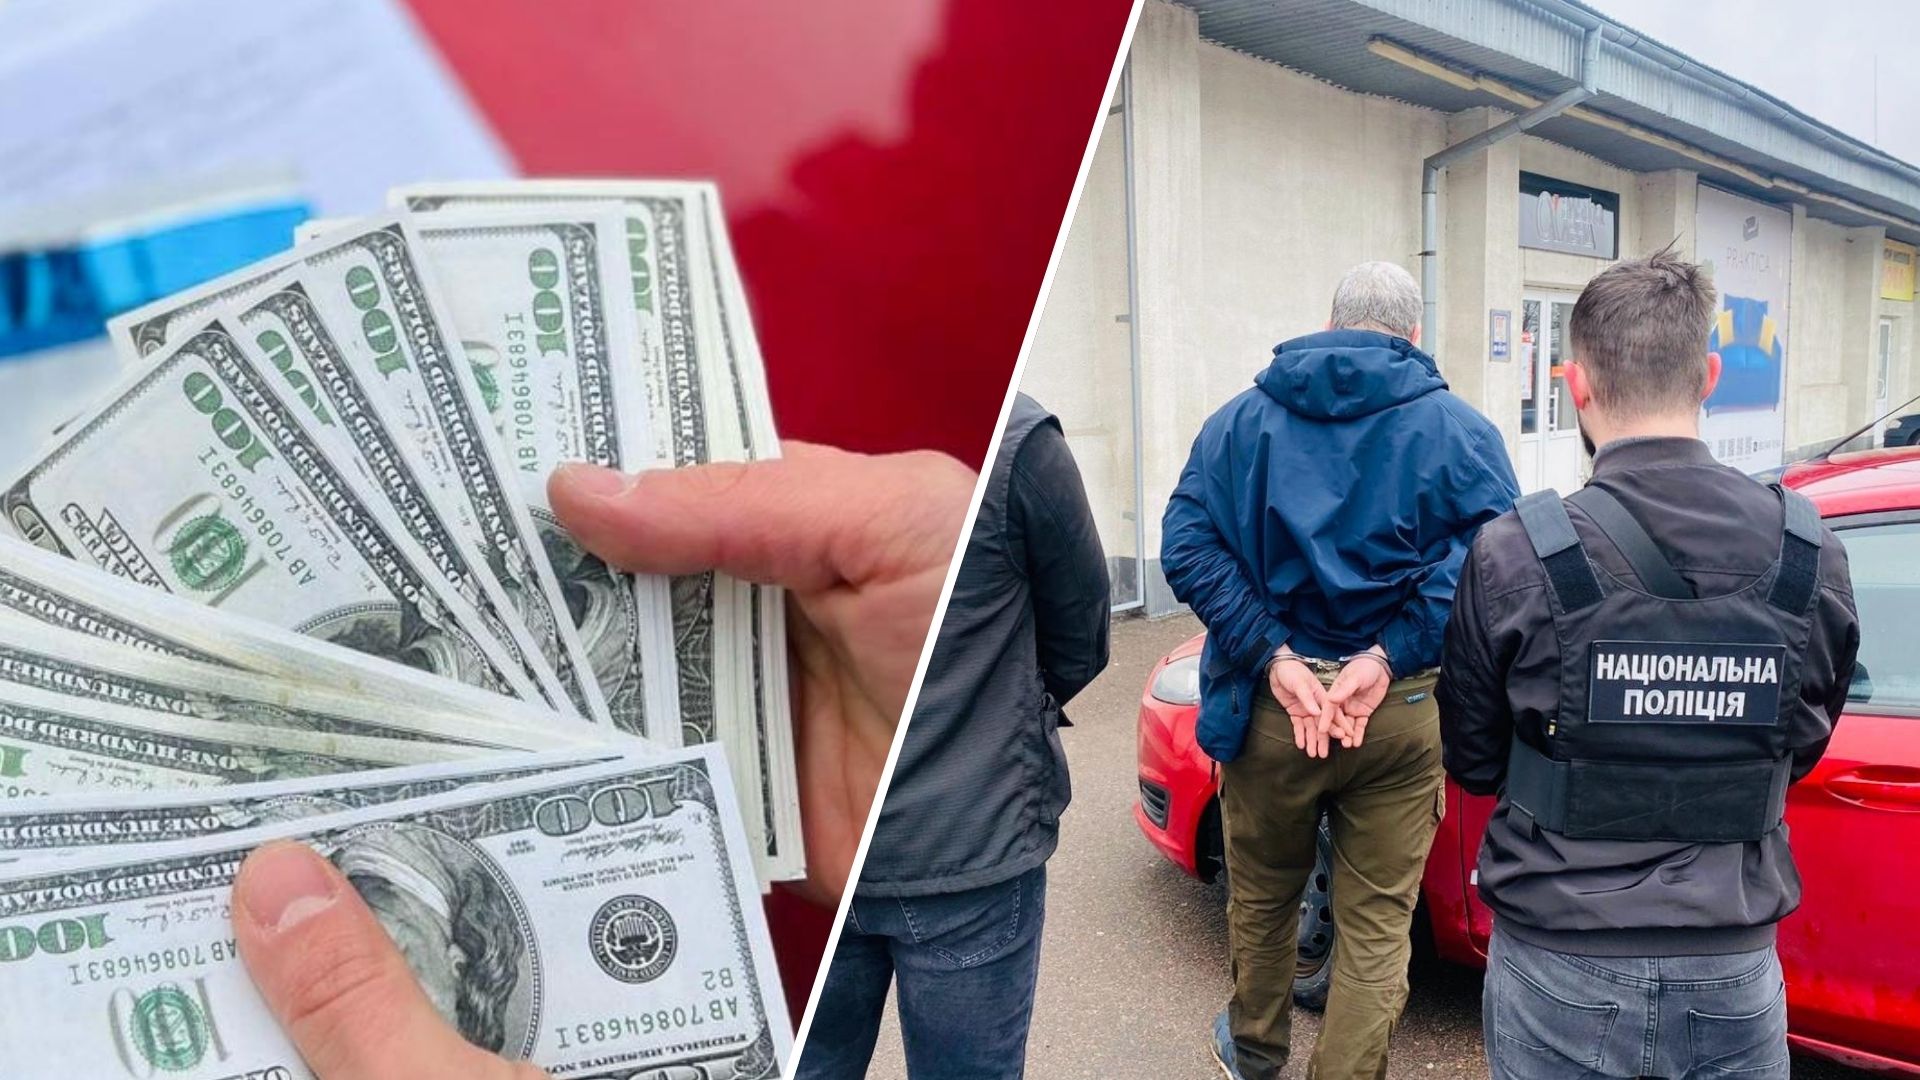 Operatives of the Lviv Border Guard Detachment exposed a resident of Lviv region who helped men of military age to illegally leave Ukraine. For his services, he received $6,500 per person.